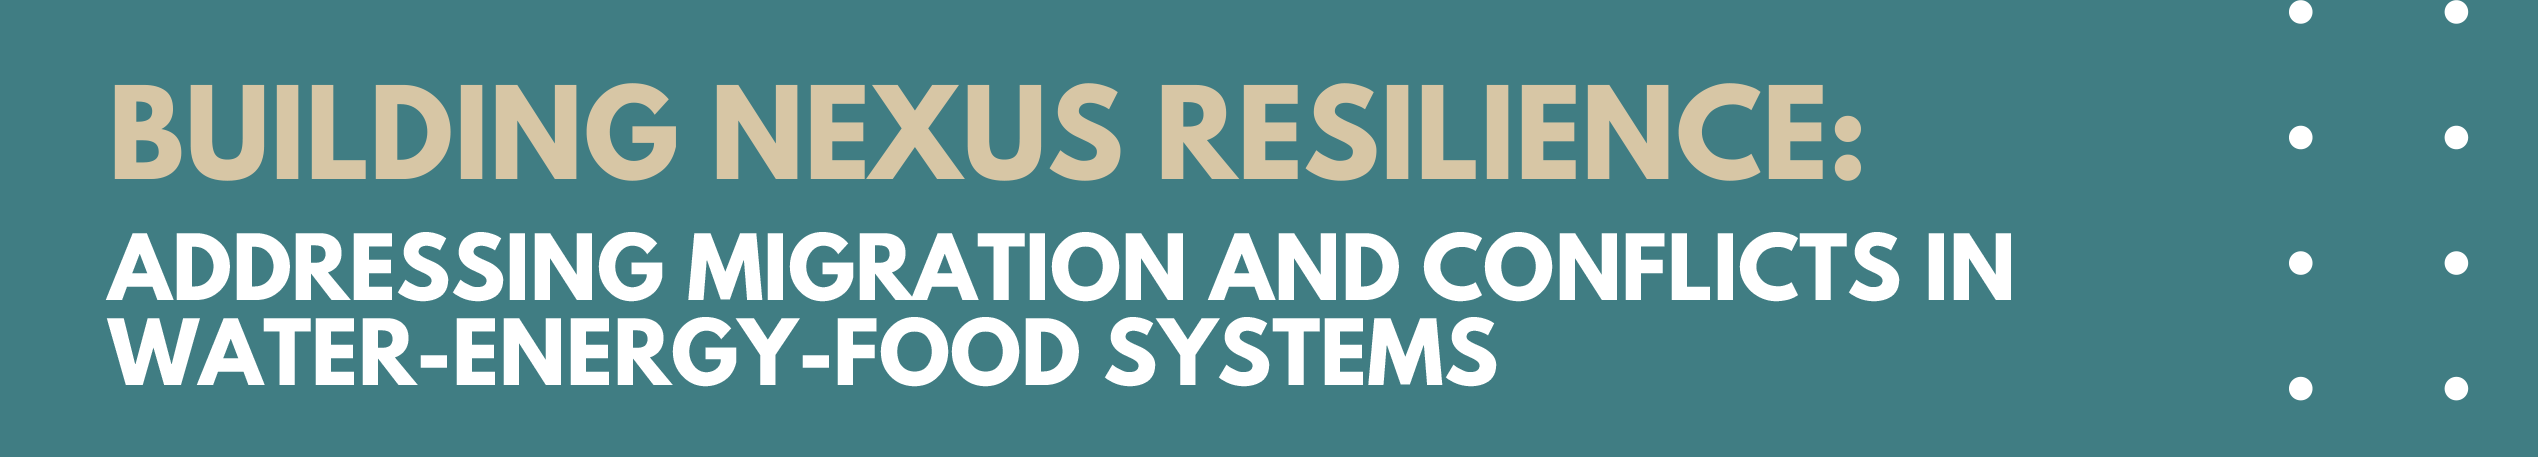 Building Nexus Resilience: Addressing Migration and Conflicts in Water-Energy-Food Systems